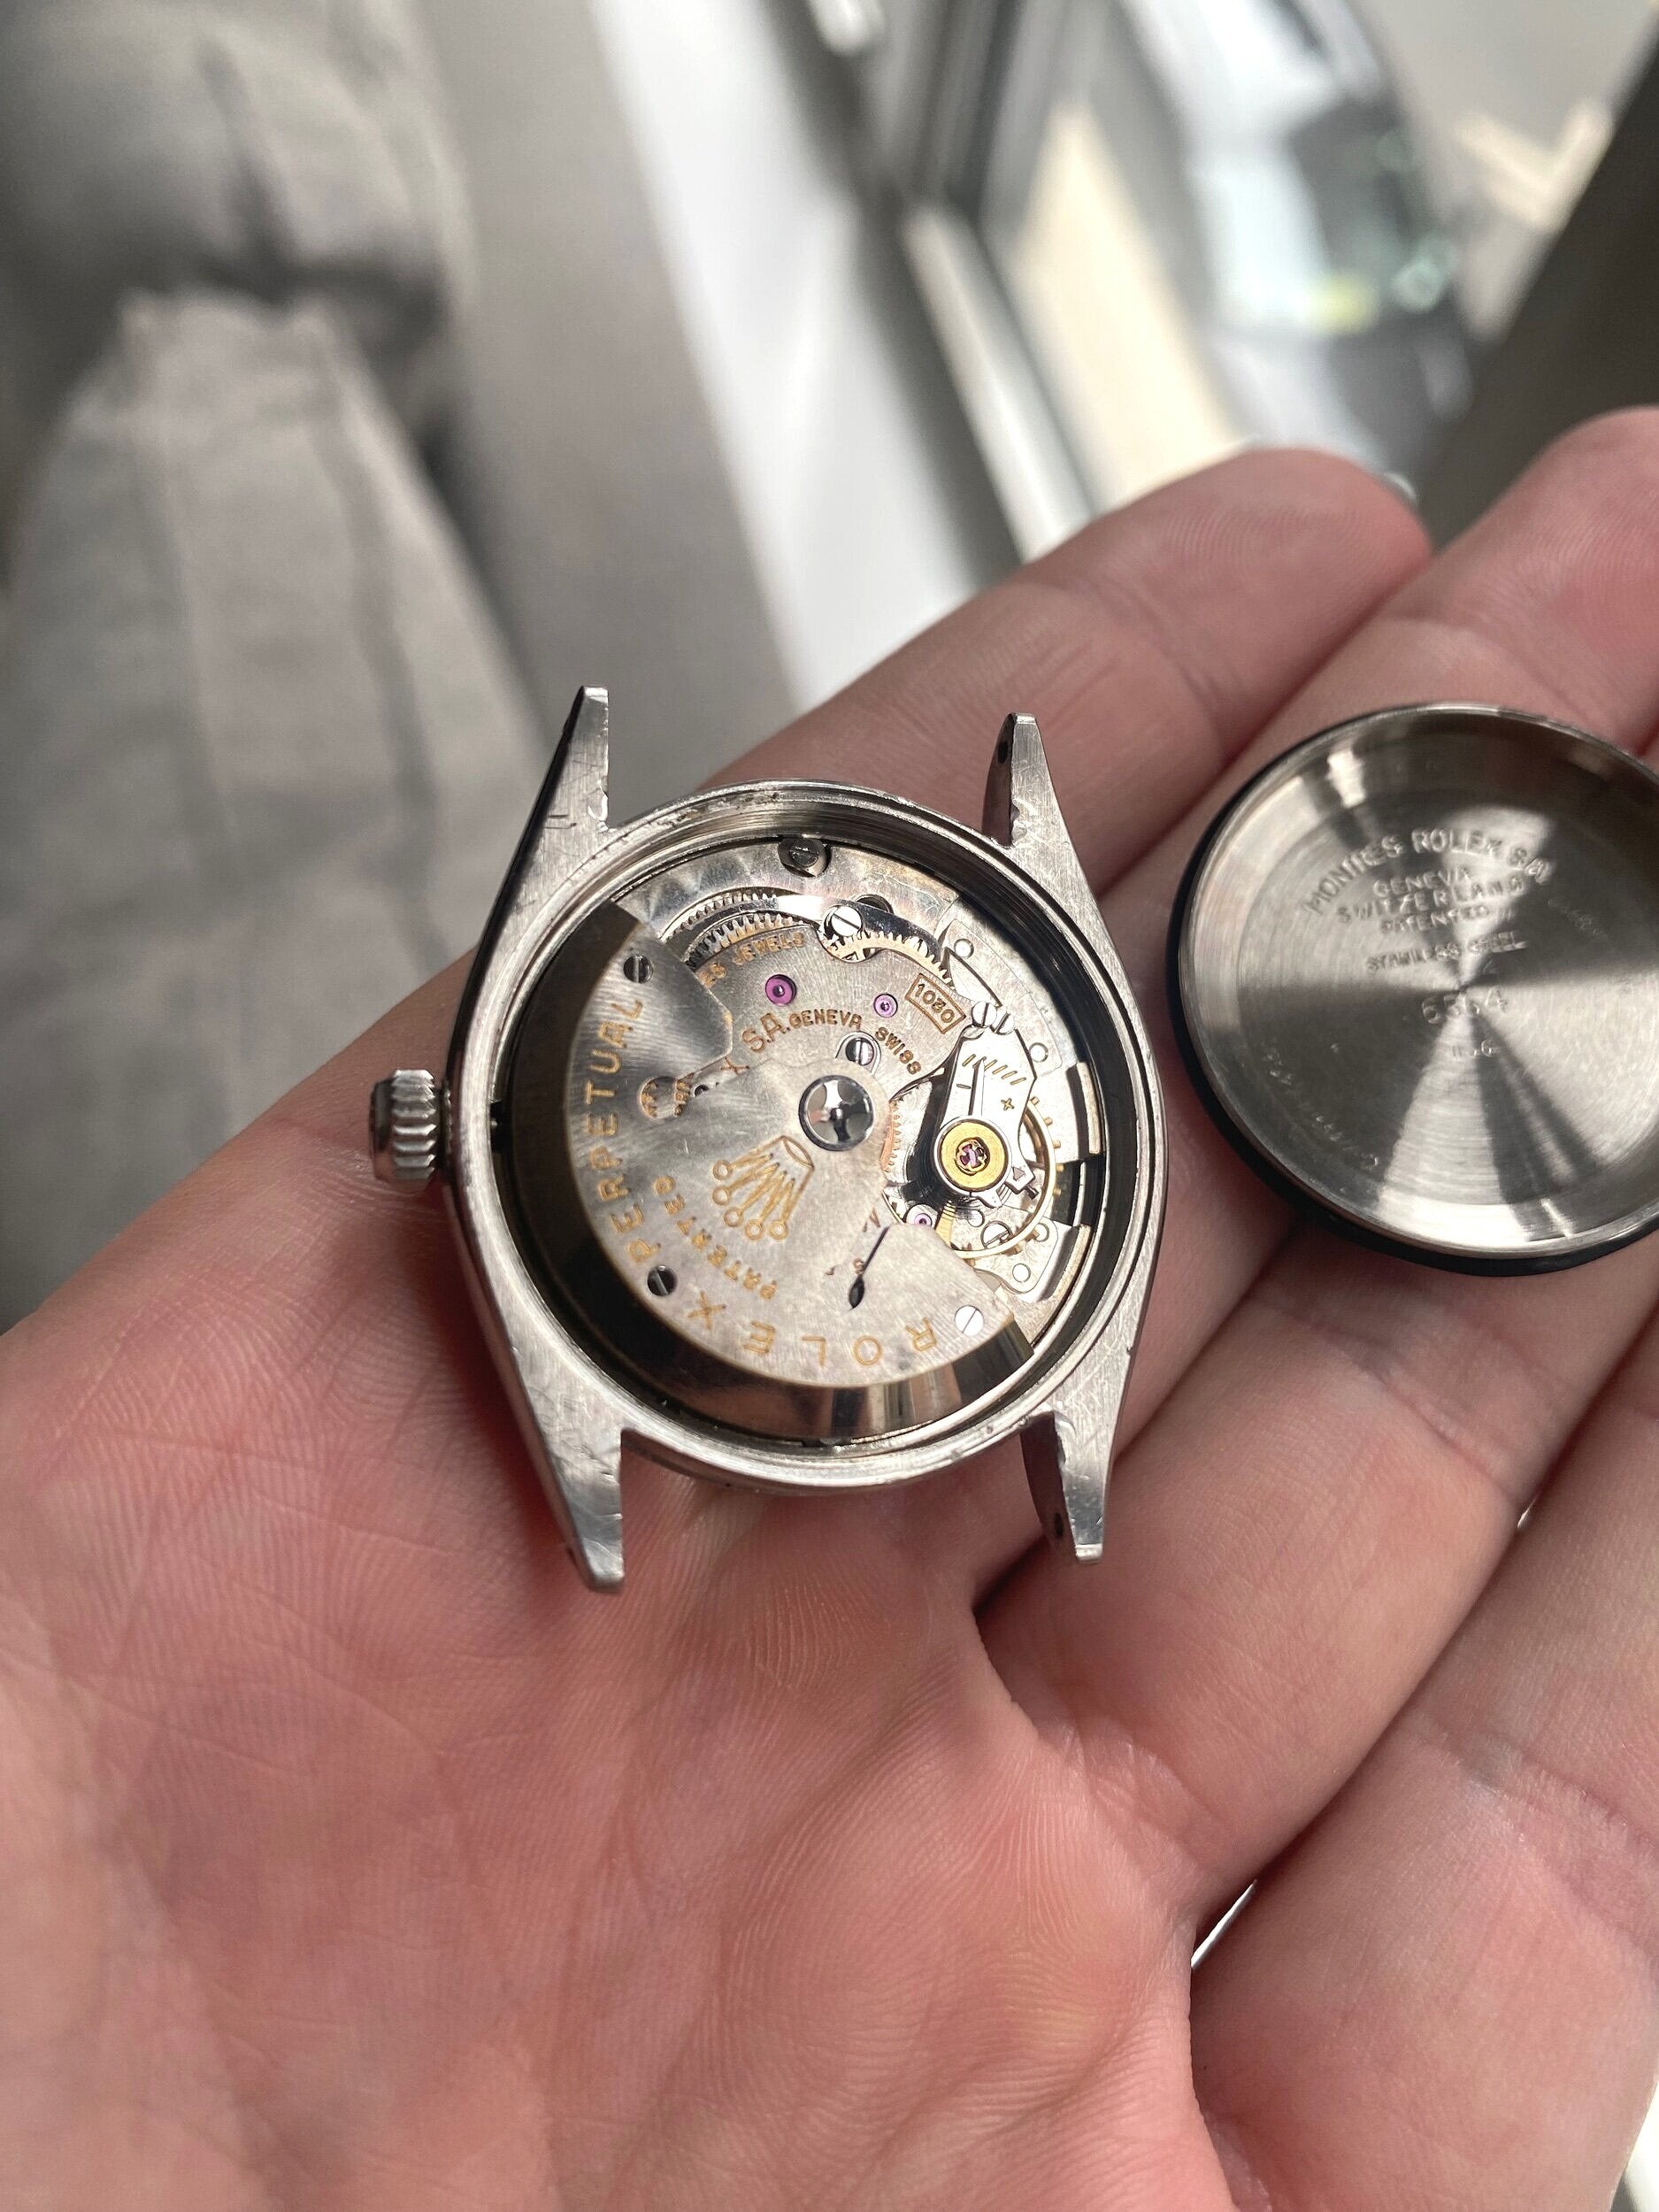 1956 Rolex Oyster Perpetual ref. 6564